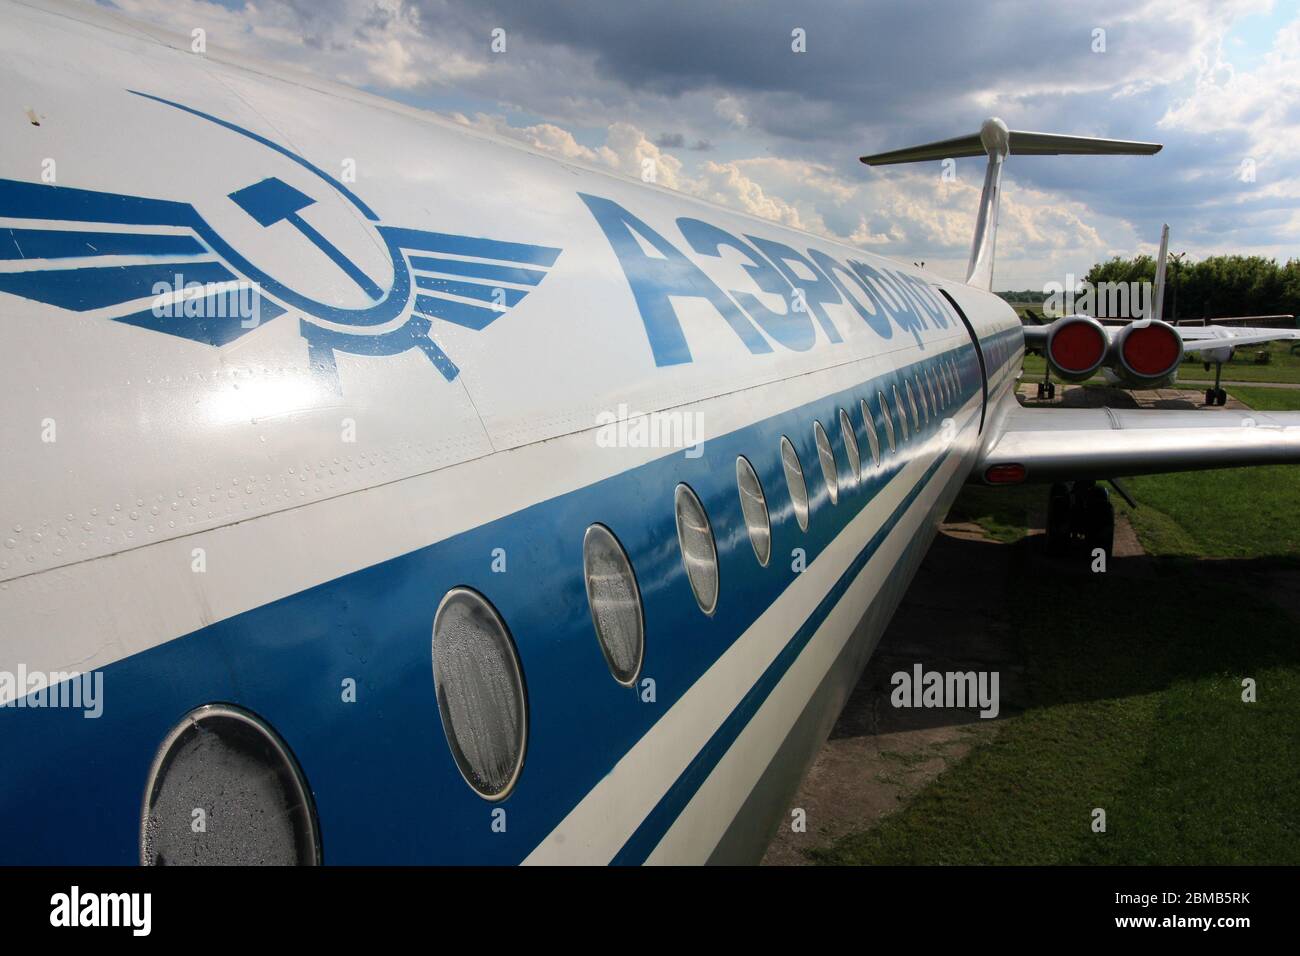 Exterior view of an old Ilyushin Il-62 'Classic' long-range narrow-body jetliner in Aeroflot livery at the Zhulyany State Aviation Museum of Ukraine Stock Photo